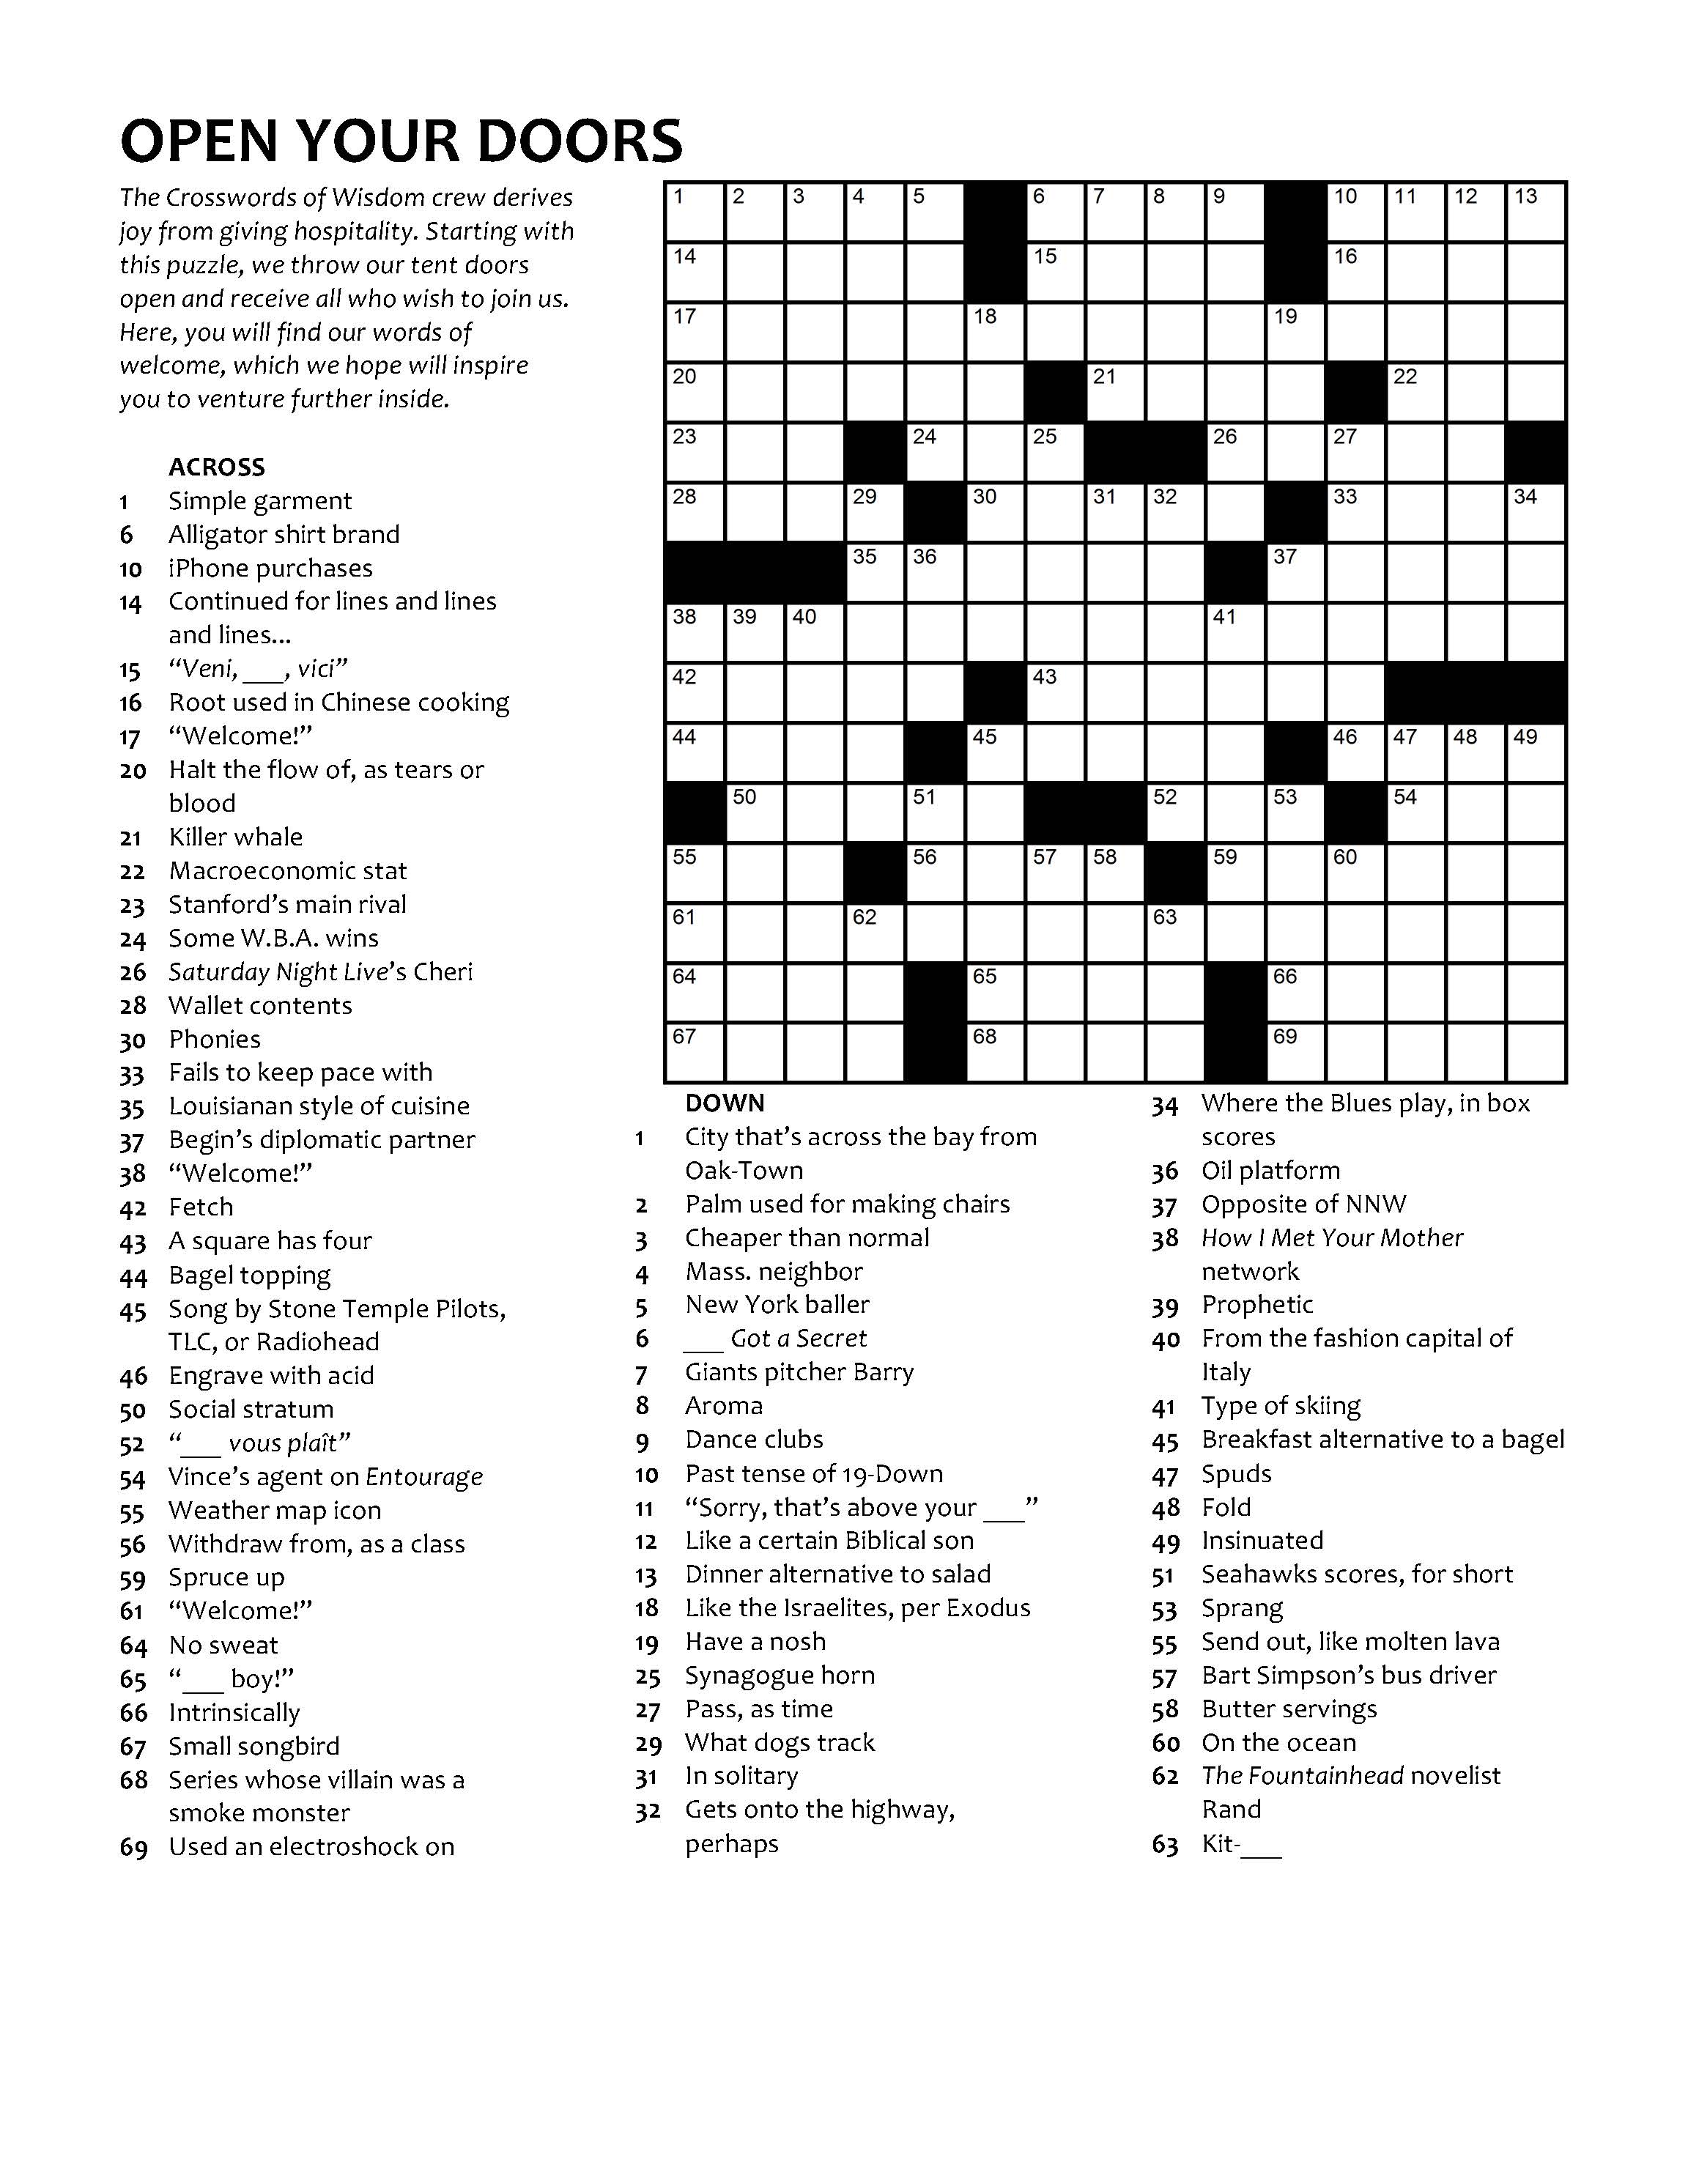 Christmas Traditions of the Royal Family Crossword - WordMint